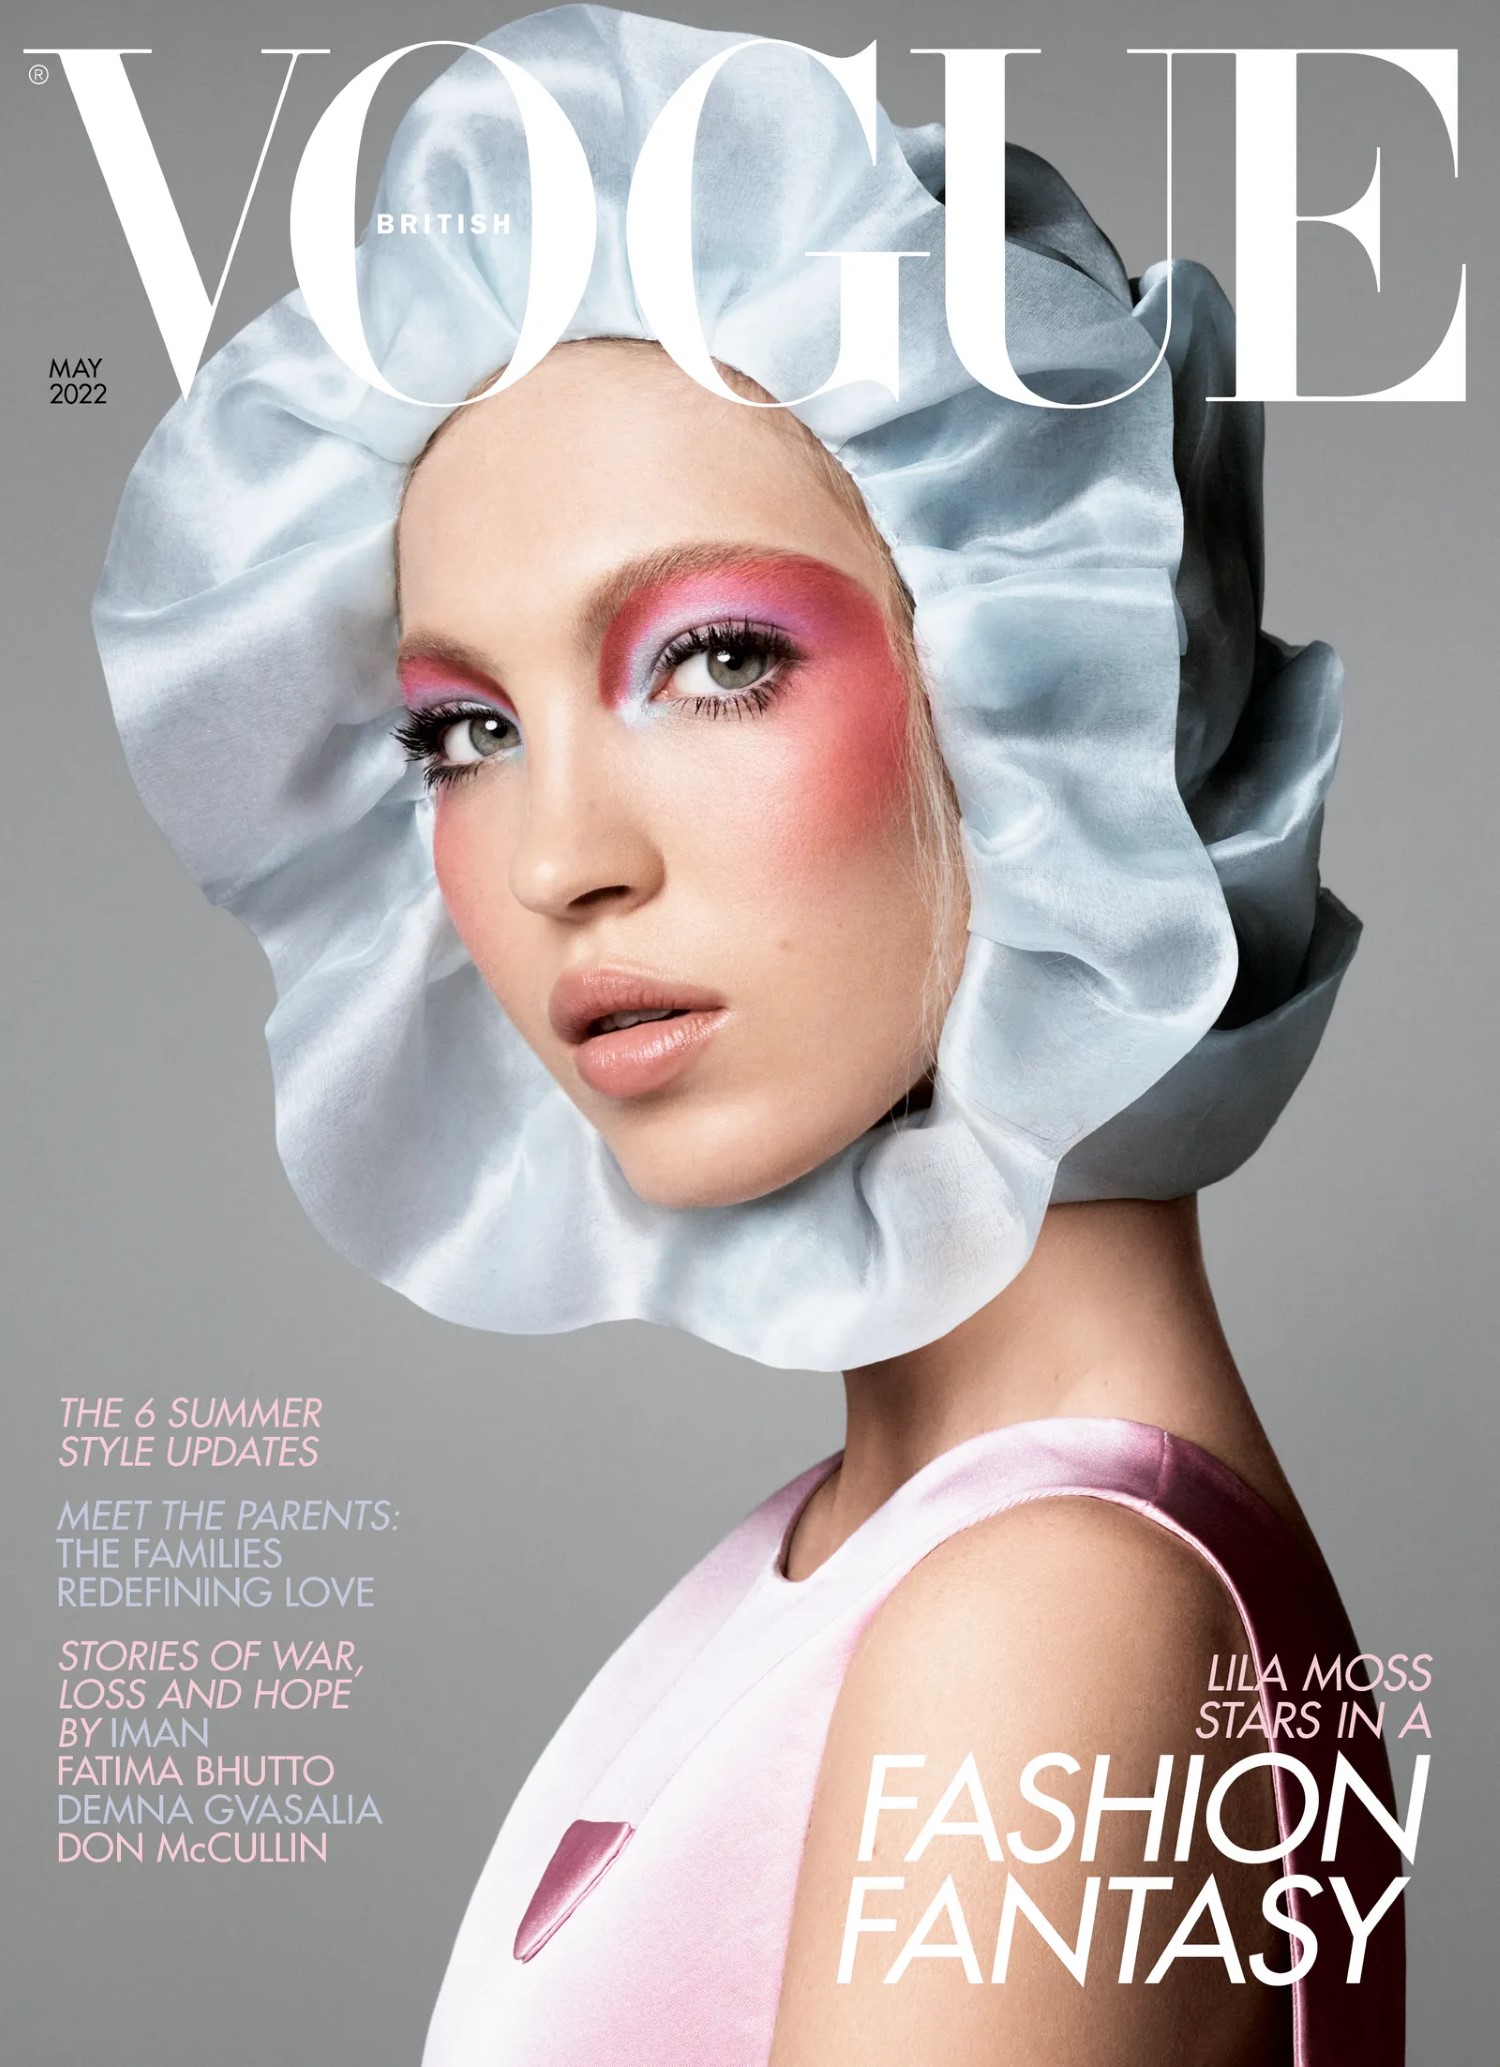 Lila Moss covers British Vogue May 2022 by Steven Meisel ...